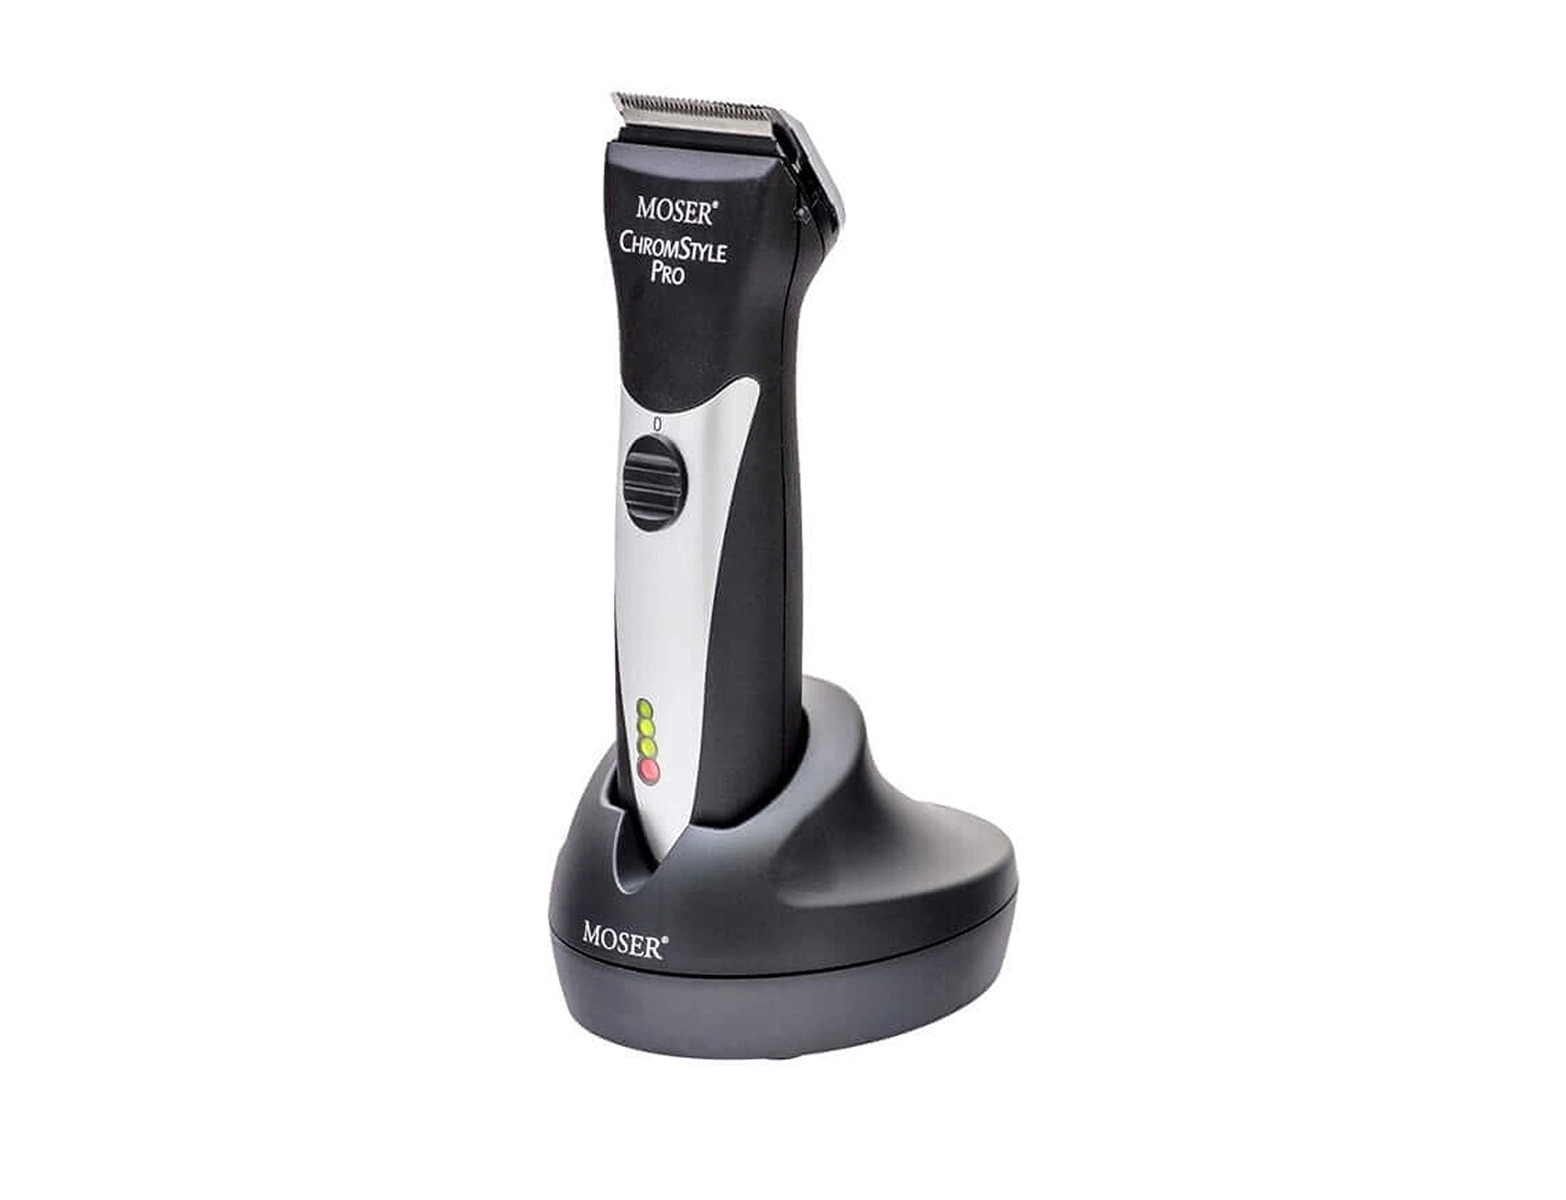 Moser Chromstyle Professional Cord/Cordless Hair Clipper, Black, Germany - 1871-0181